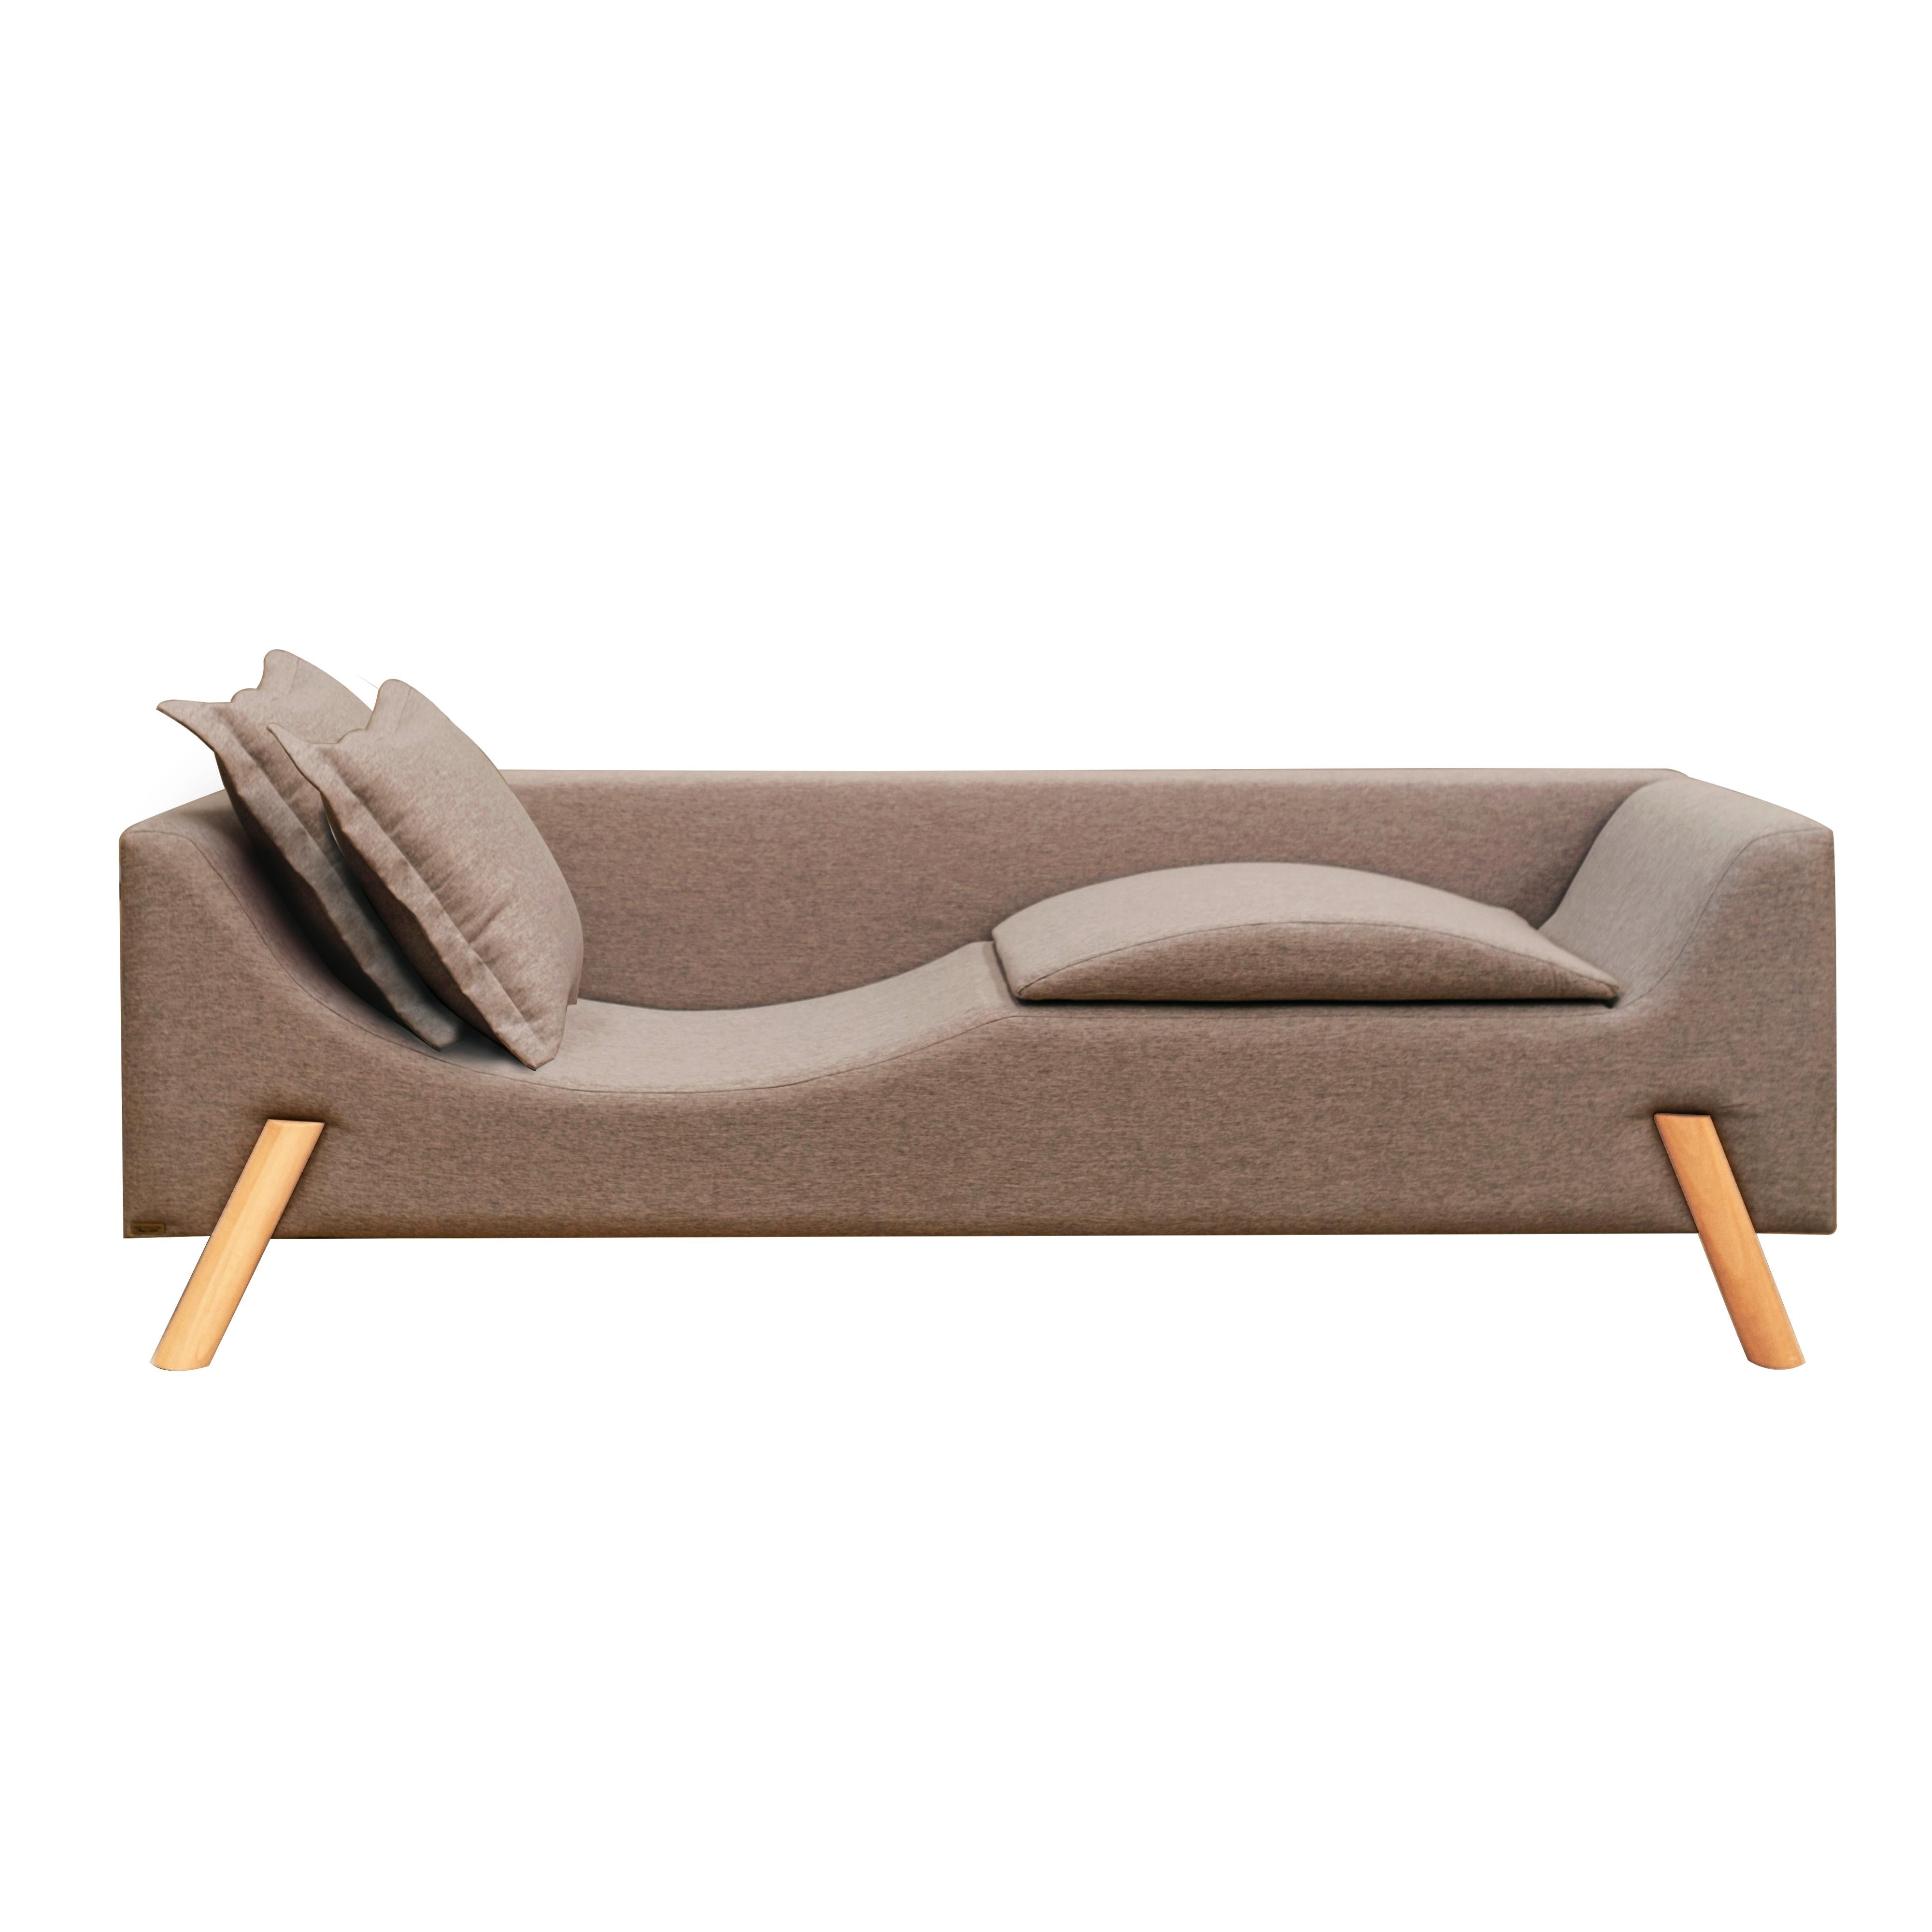 double sided chaise lounge